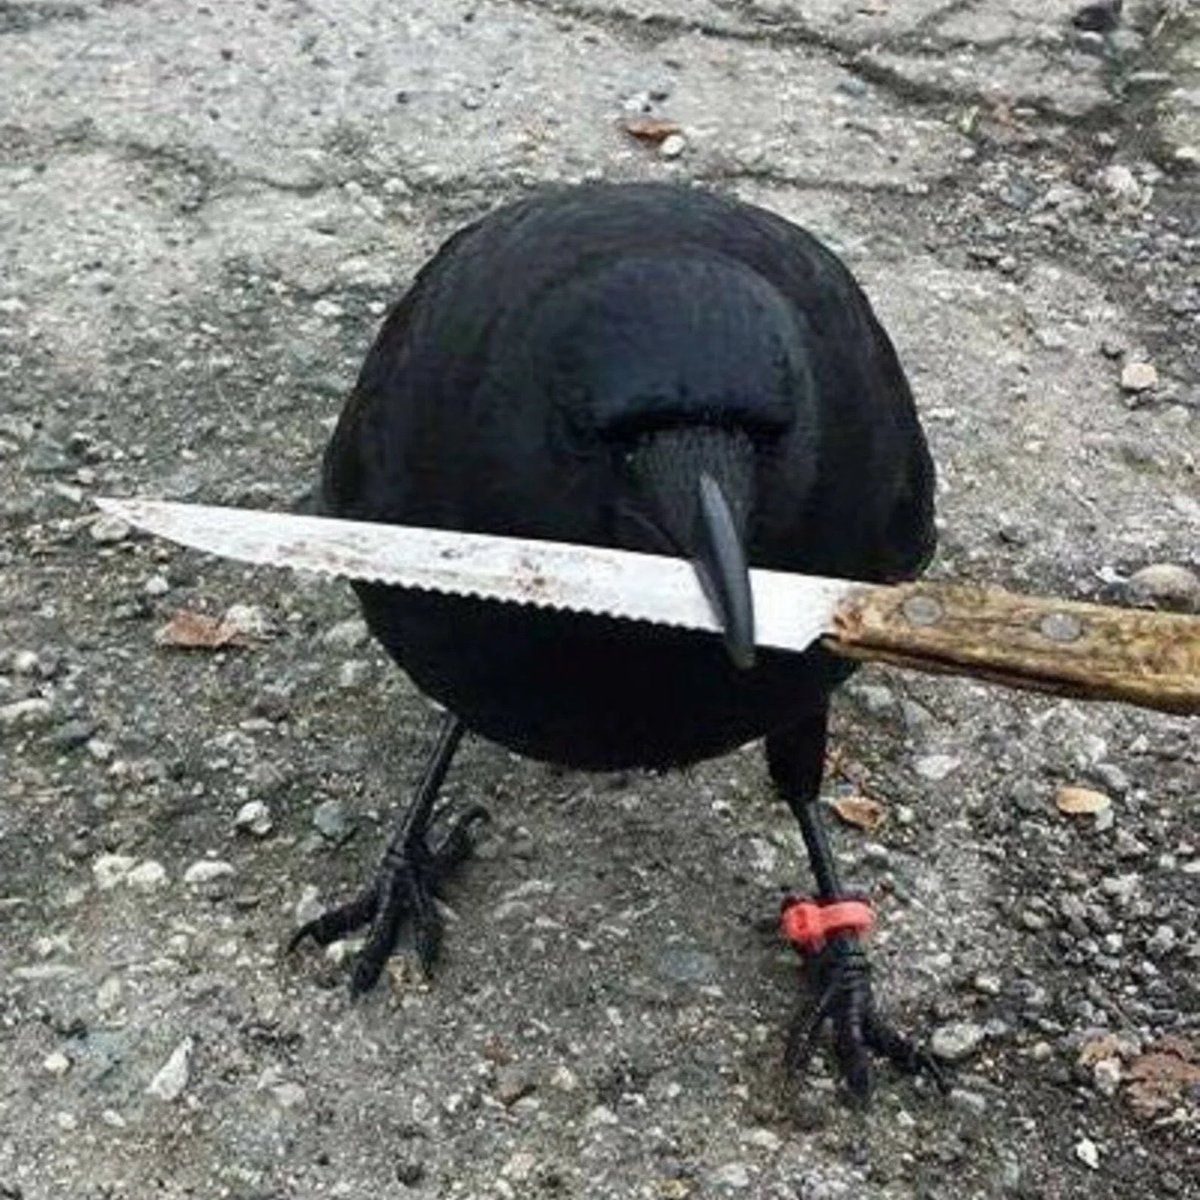 @Sartoshi0x Agree with you.
crow with knife. Solid community.